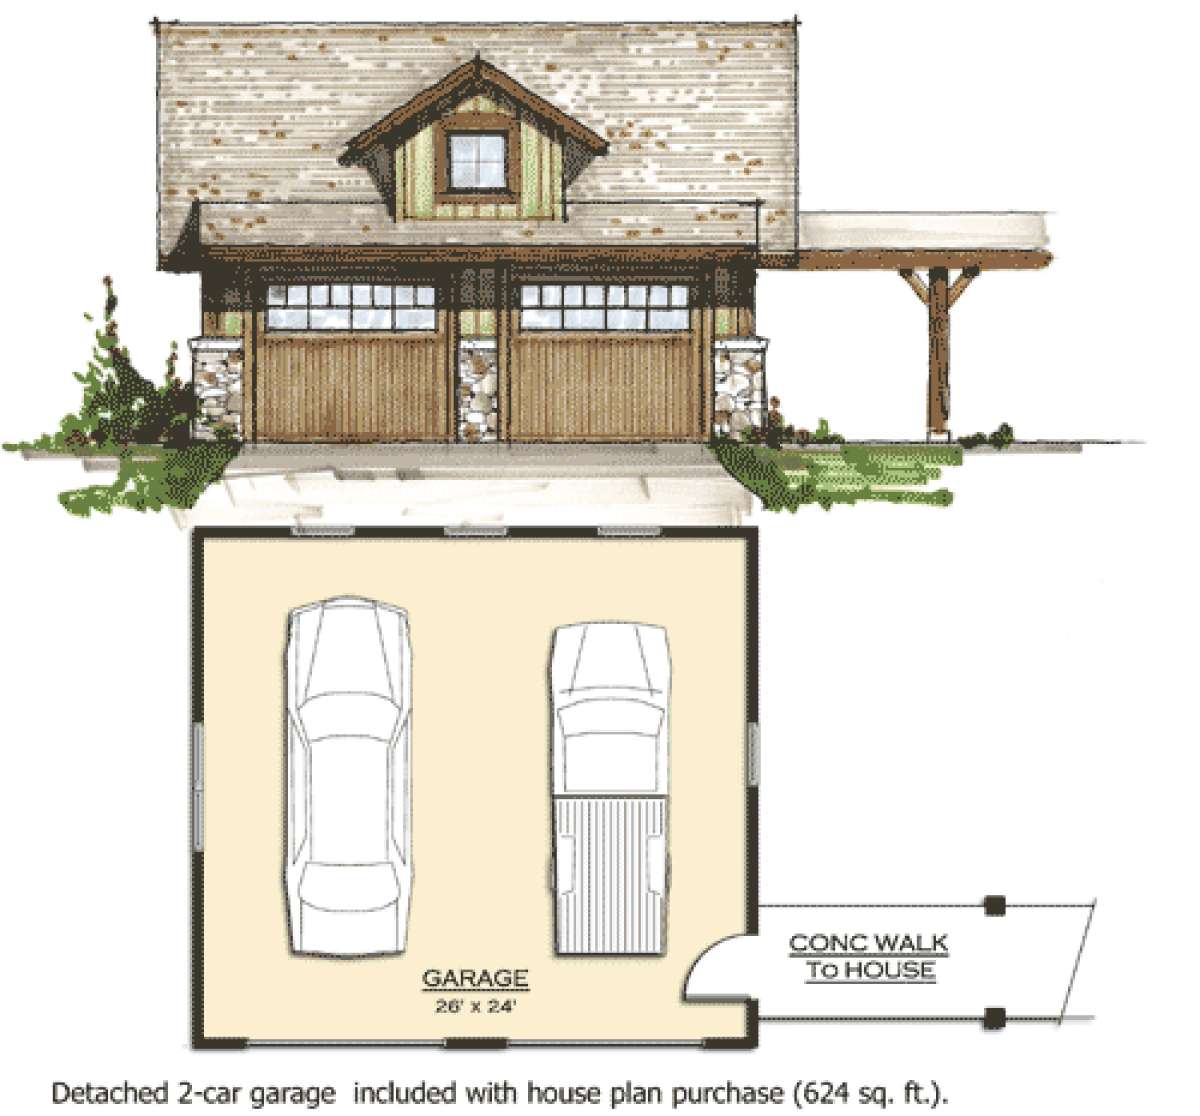 Garage for House Plan #8504-00079